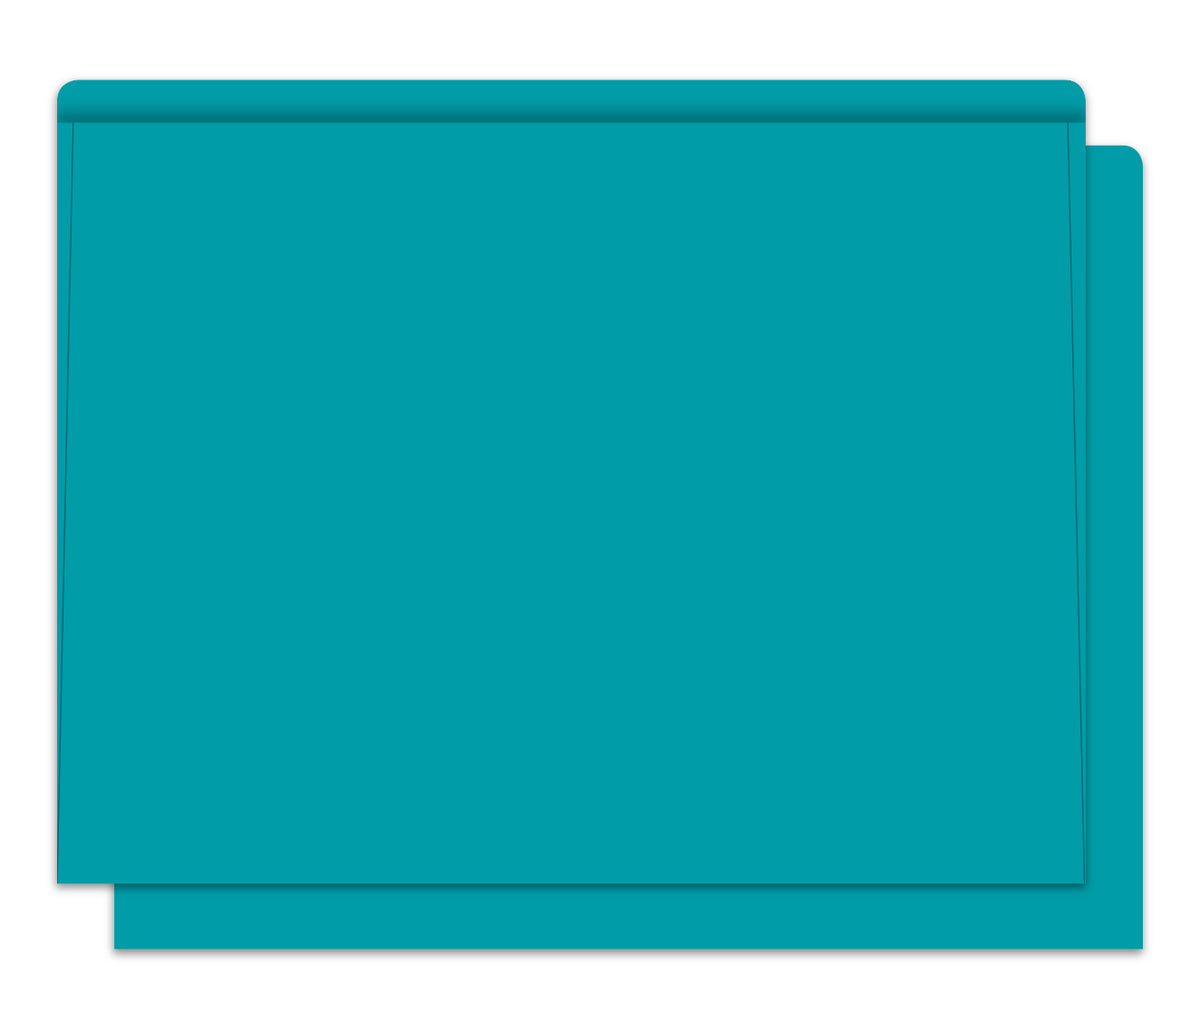 Heavy Duty Deal Envelopes (Jackets) Plain in Teal [Packs of 100]; image is a plain, teal-colored deal jacket. www.flywheelnw.com